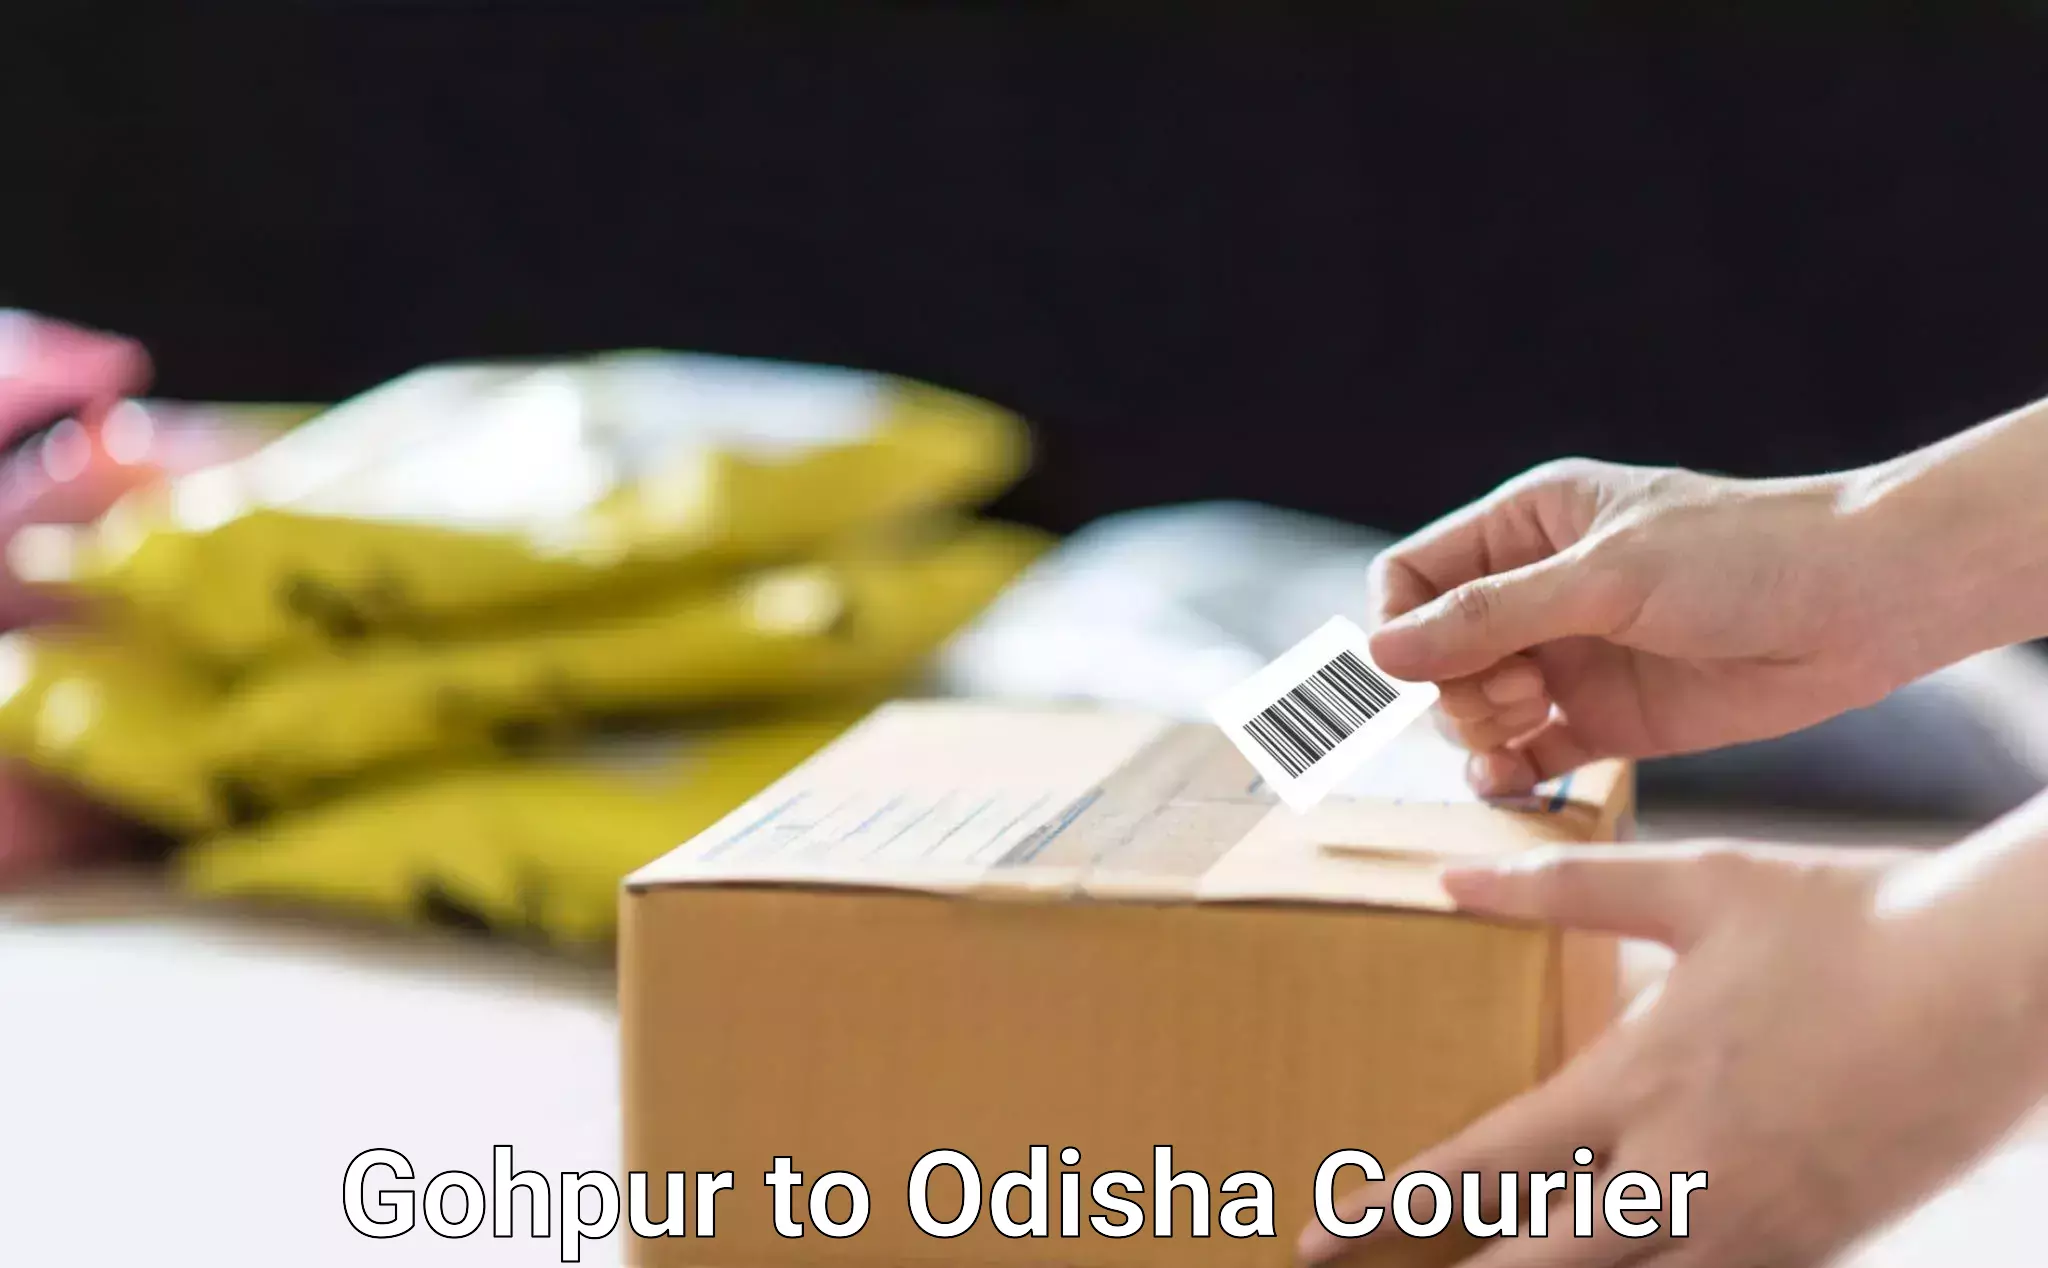 Comprehensive shipping services Gohpur to Bissam Cuttack